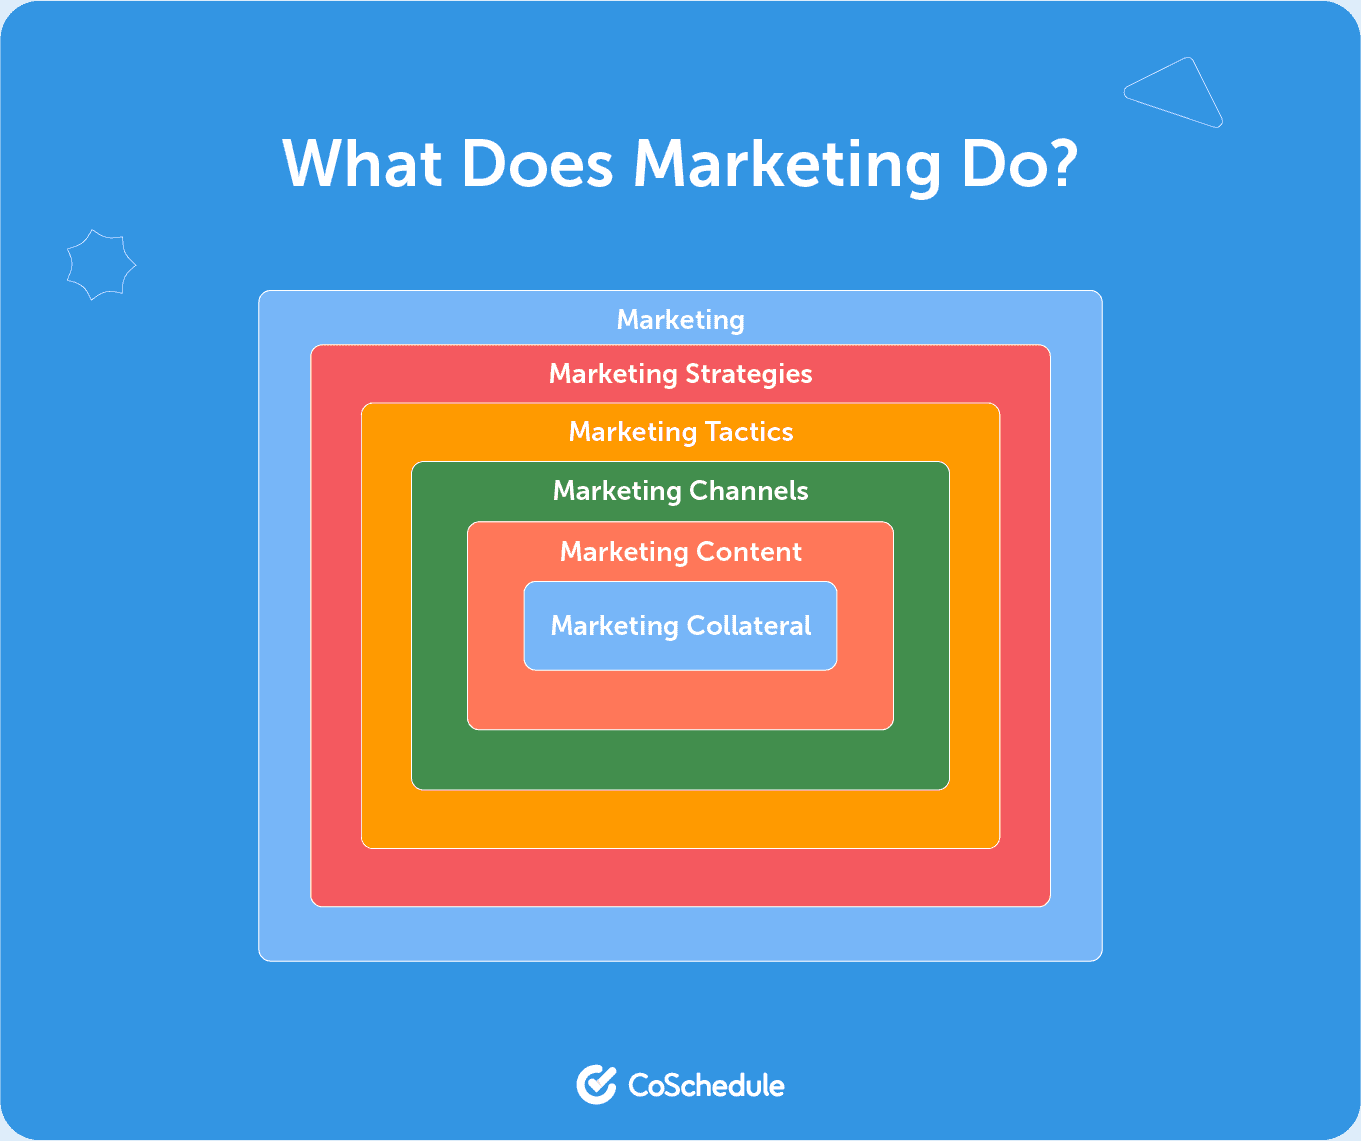 The different tiers of what marketing does presented by CoSchedule including marketing tactics, strategies, channels, content and collateral.